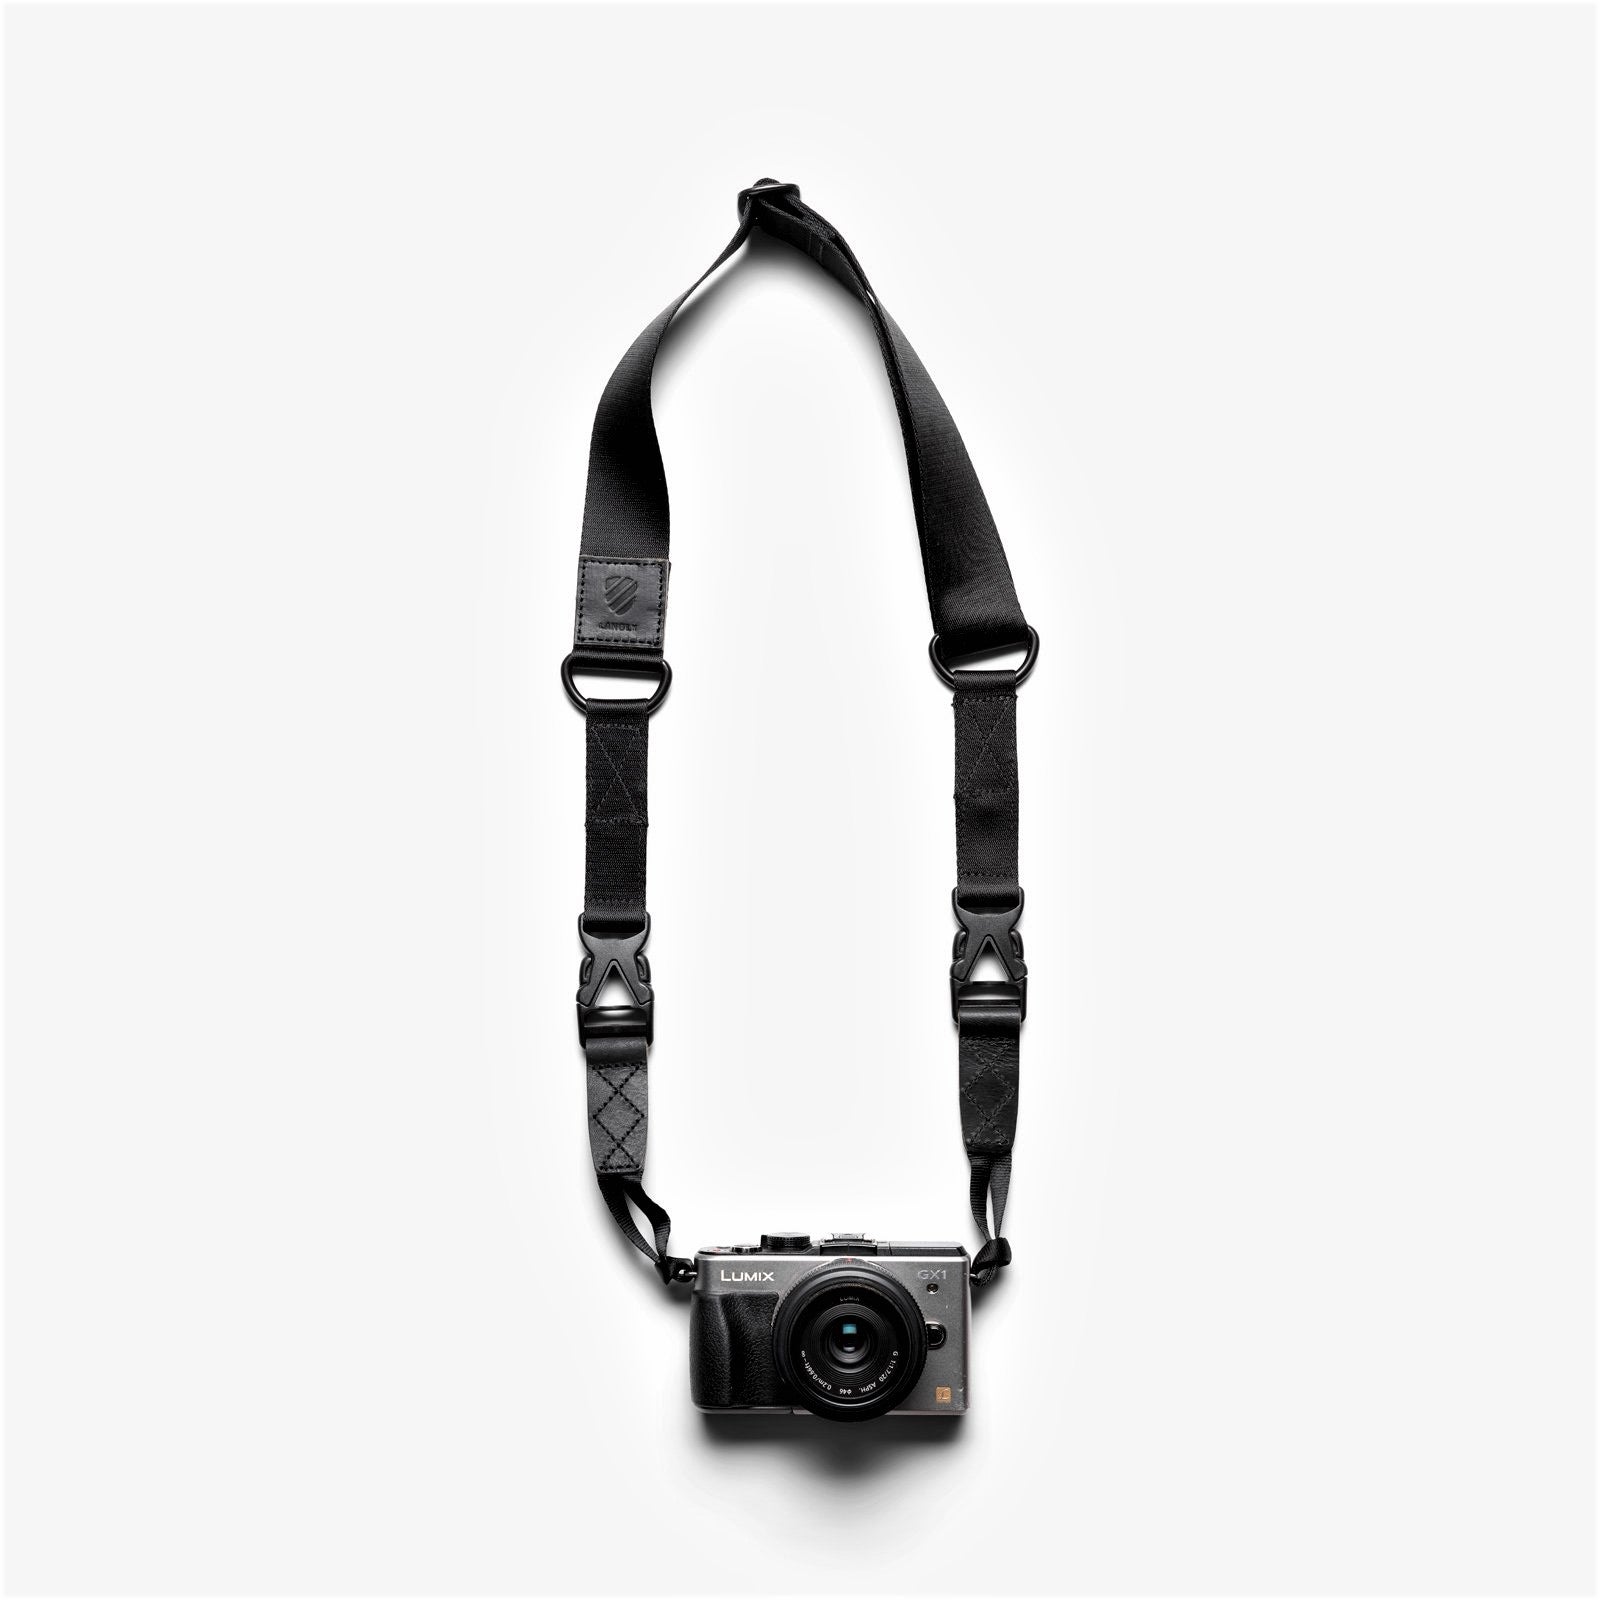 Langly Tactical Camera Strap (Black) with Attached Camera - Not Included